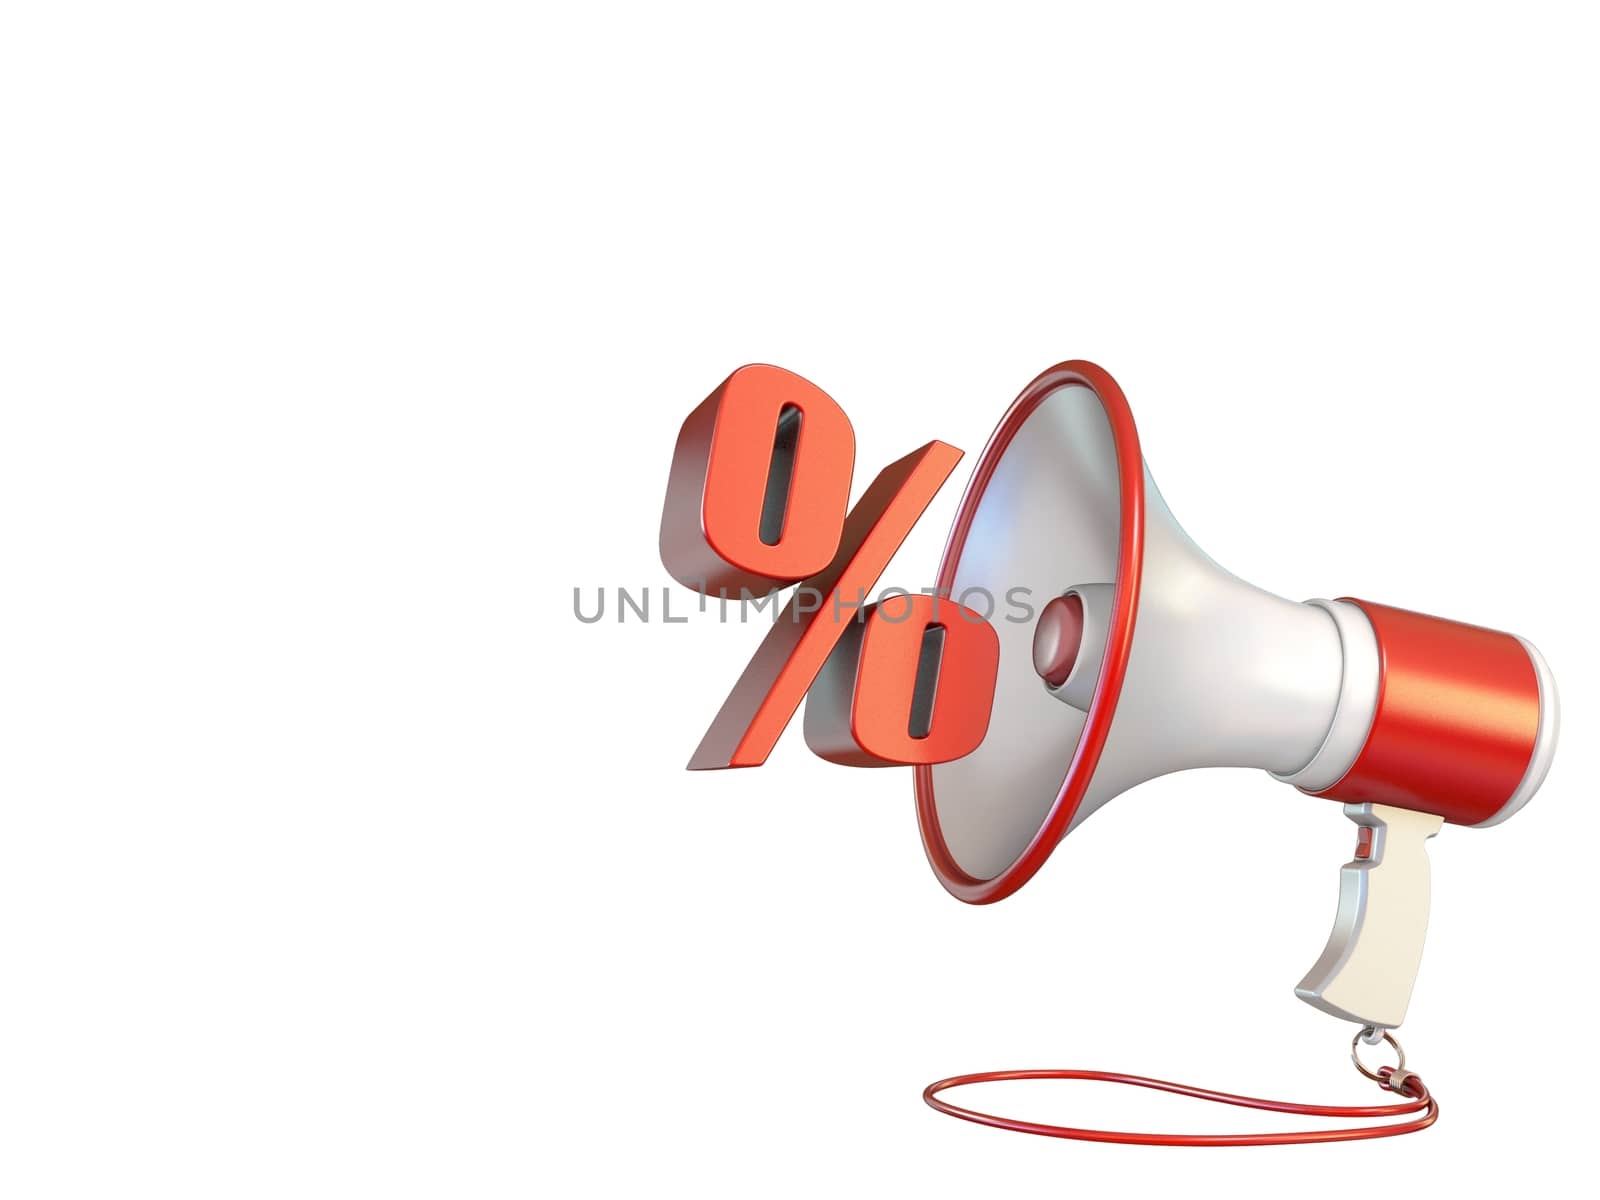 Percent sign and megaphone 3D rendering illustration isolated on white background